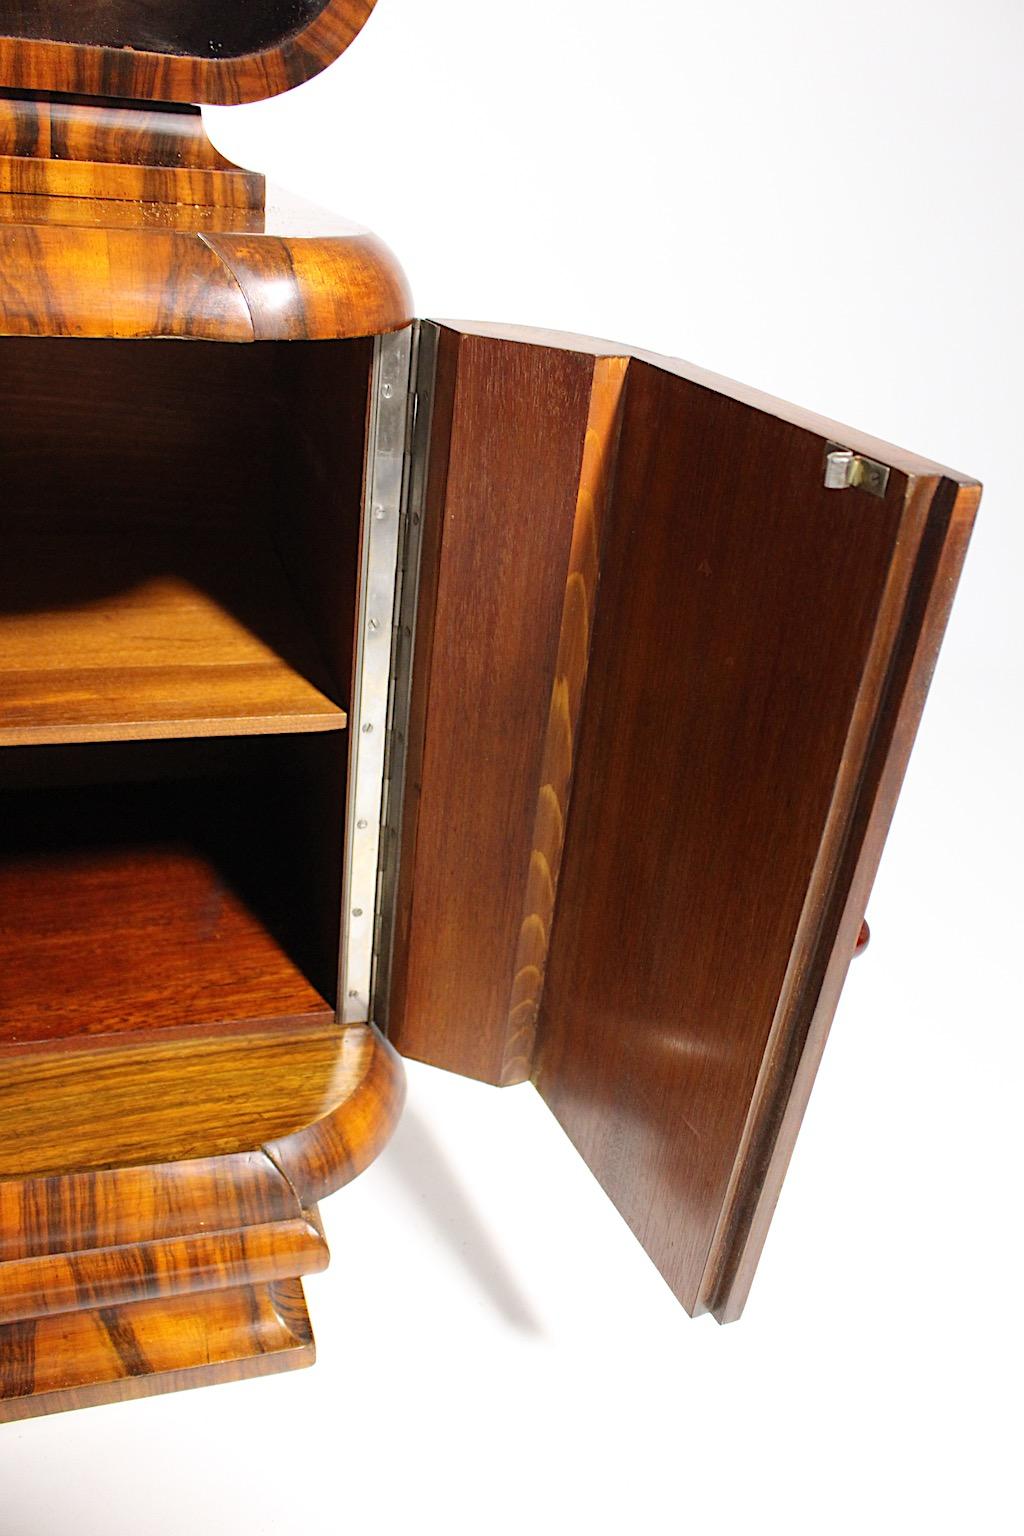 Art Deco Walnut Vintage Pair of Nightstands or Chests or Commodes 1930s Vienna For Sale 13